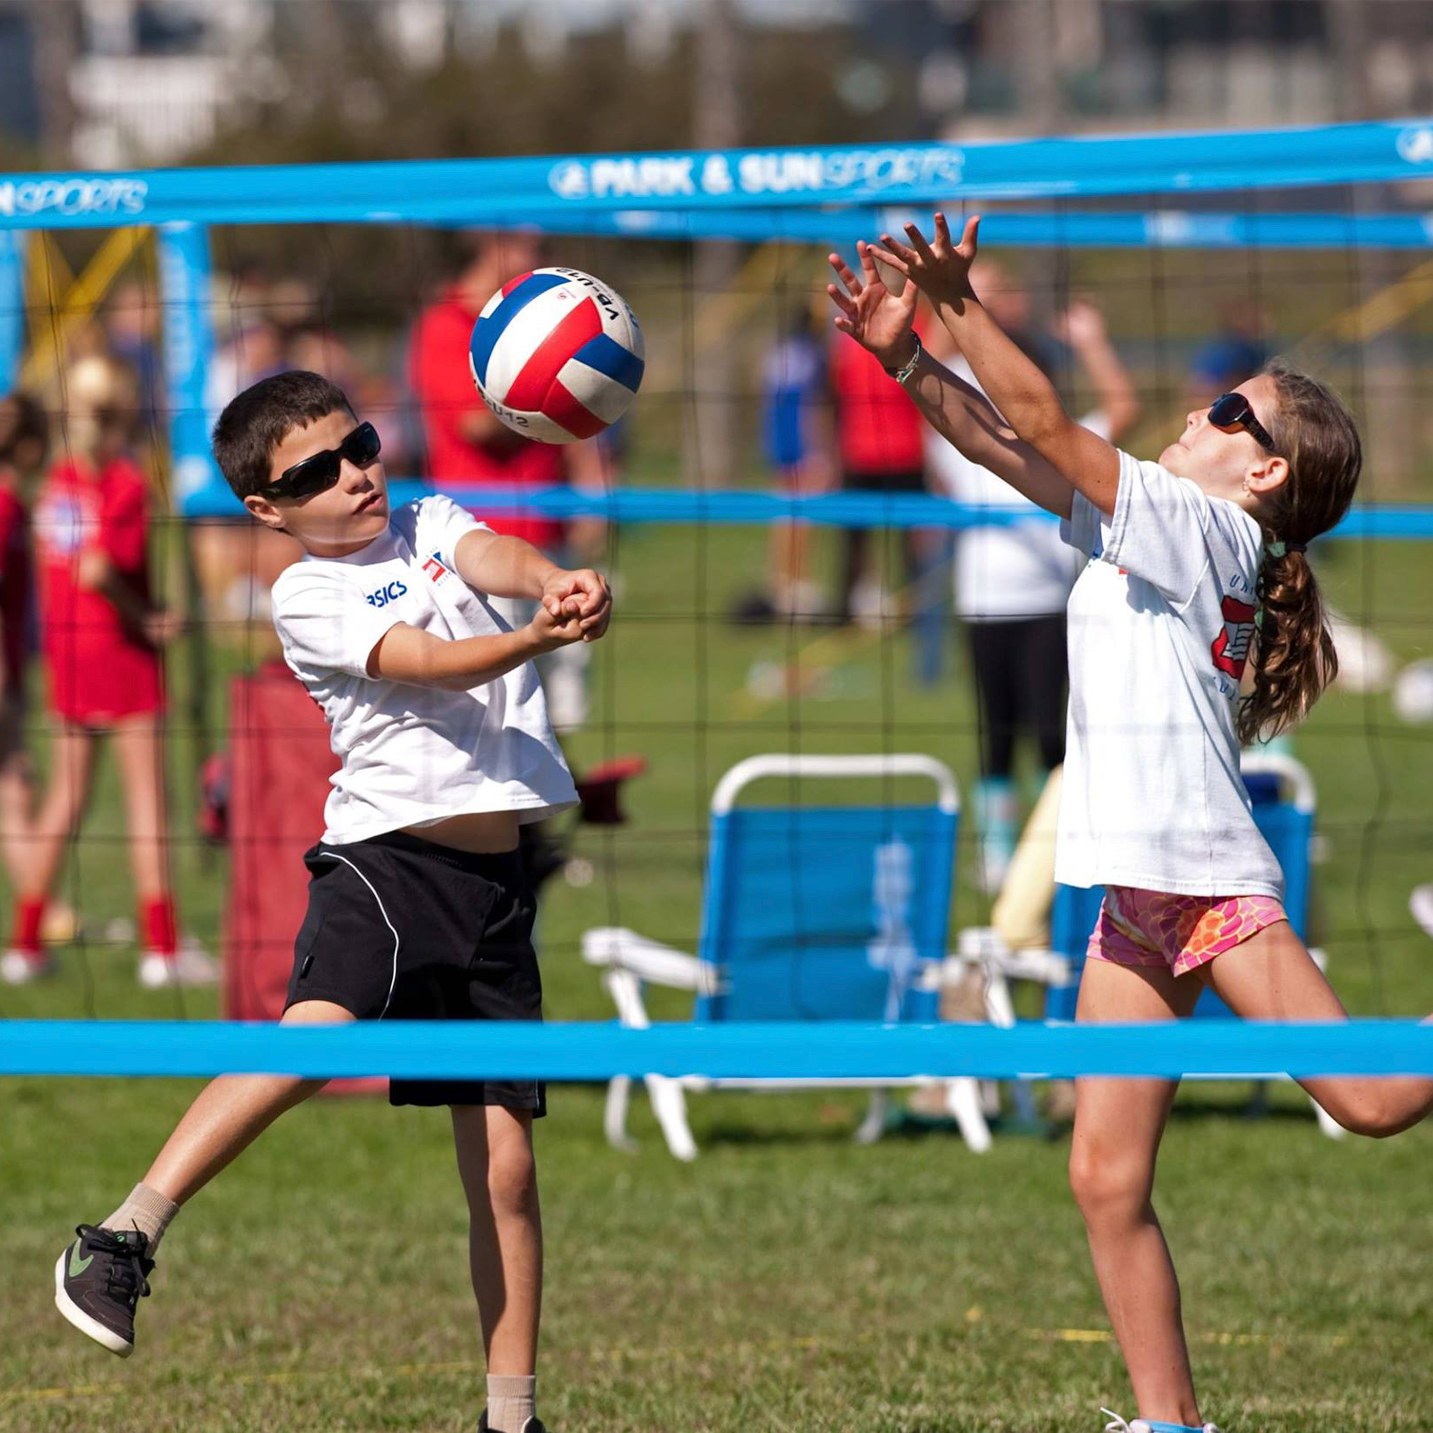 The United States Youth Volleyball League provides every child between the ages of 7 and 15 a chance to learn and play volleyball in a fun, safe, and supervised environment.